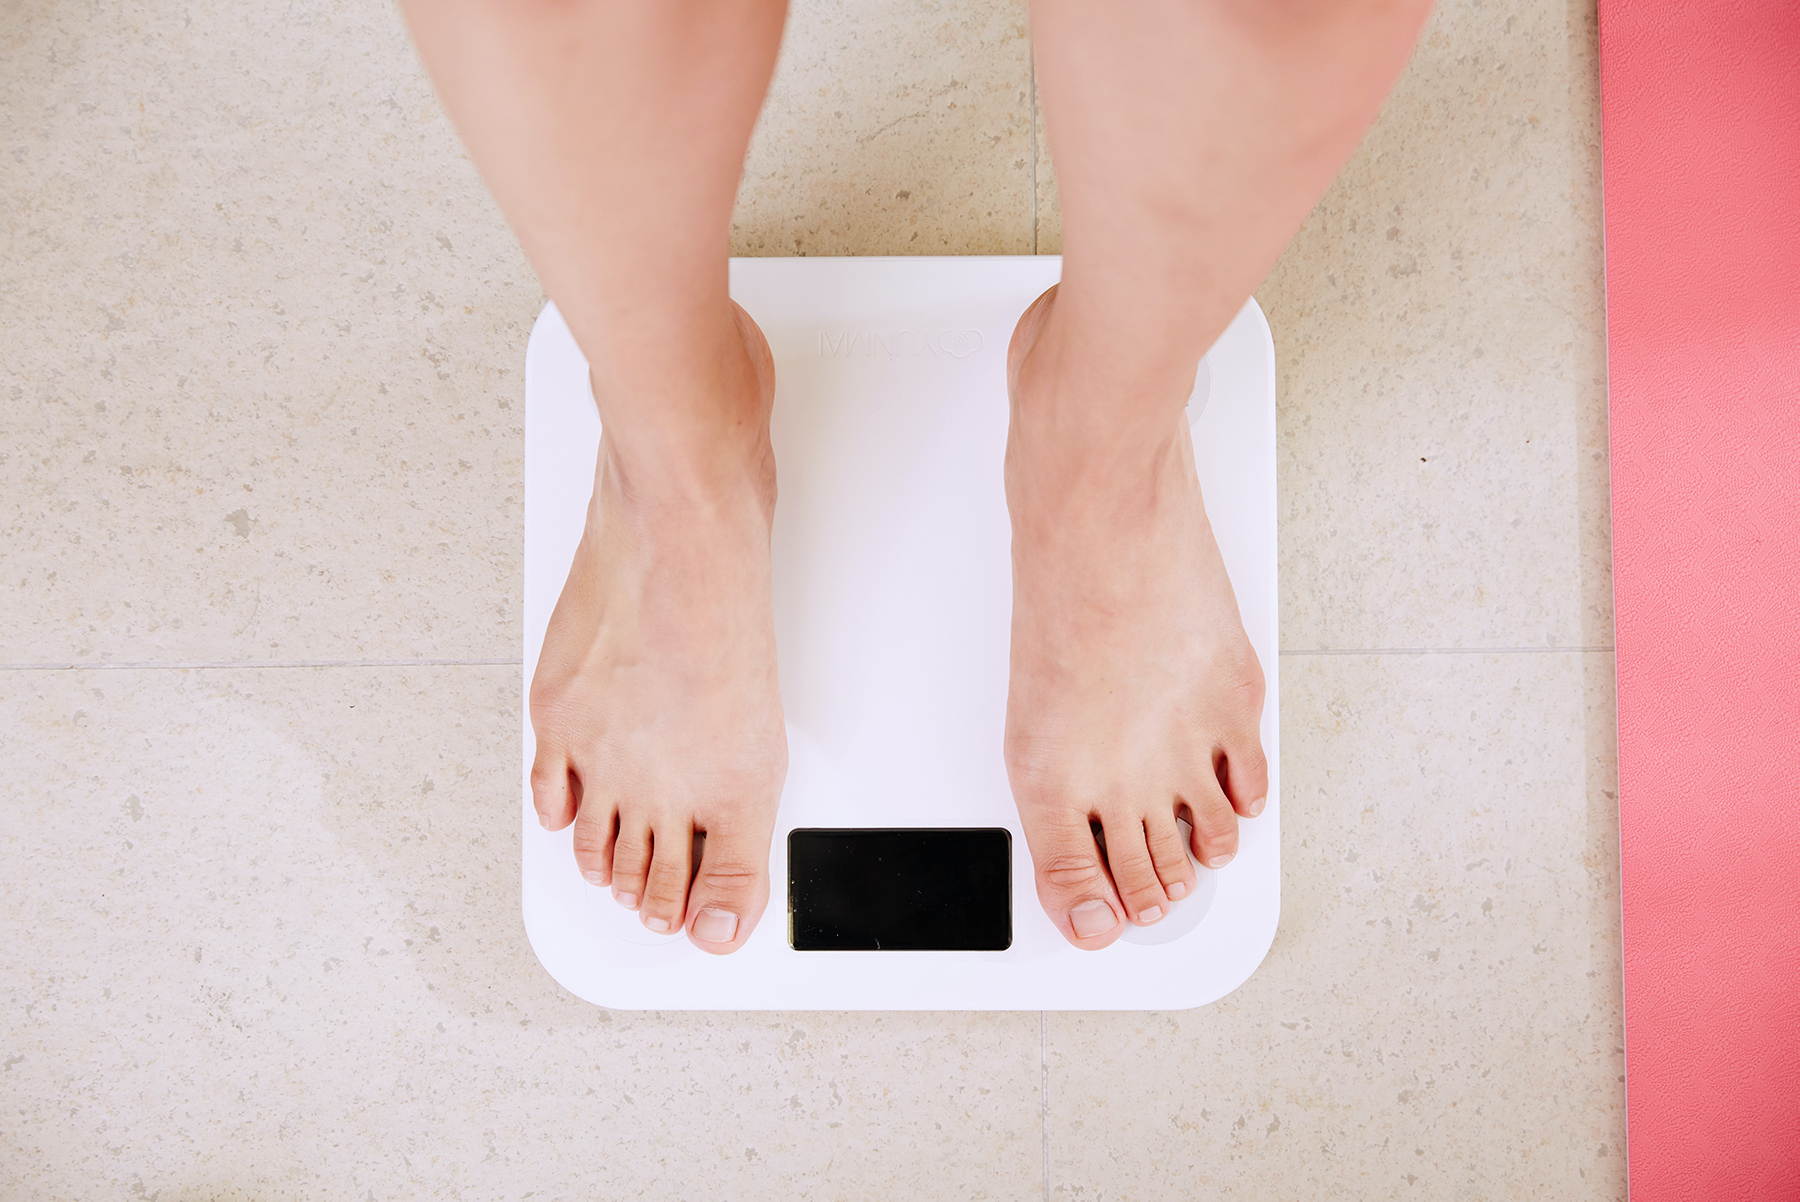 Person standing in weight scale